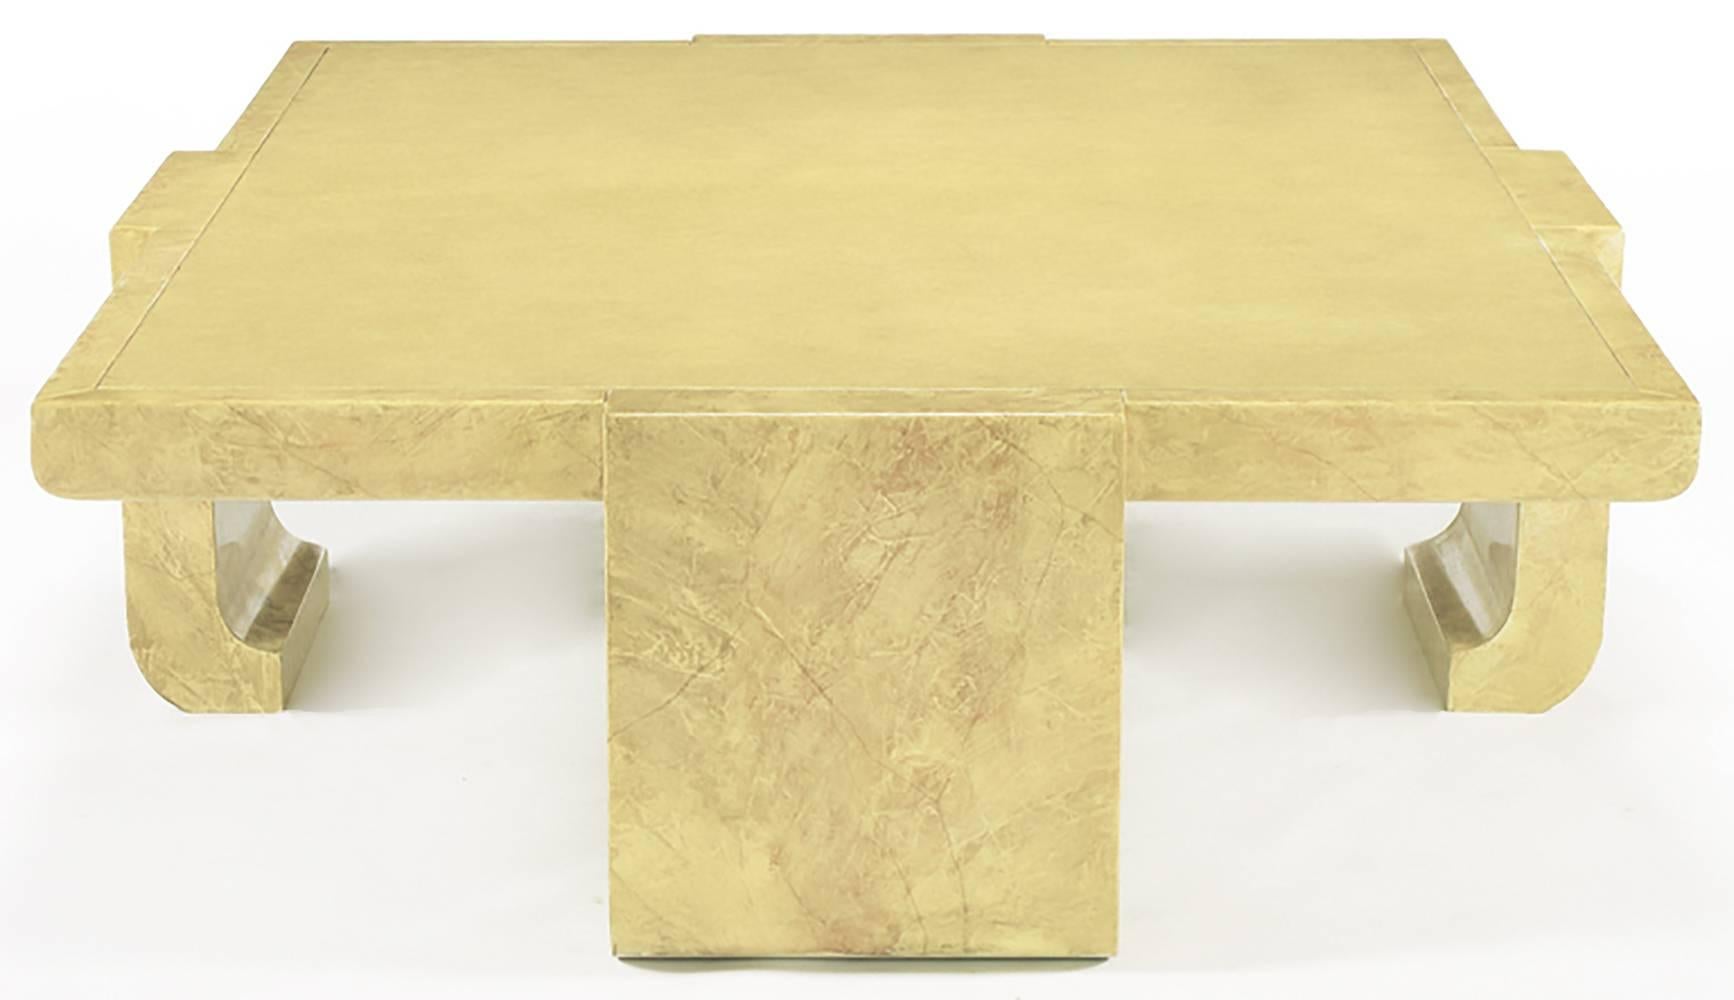 Monumental Asian inspired coffee table in creamy tan hand lacquered faux goatskin with a lizard-textured center by Alessandro for Baker. An amazing coffee table.